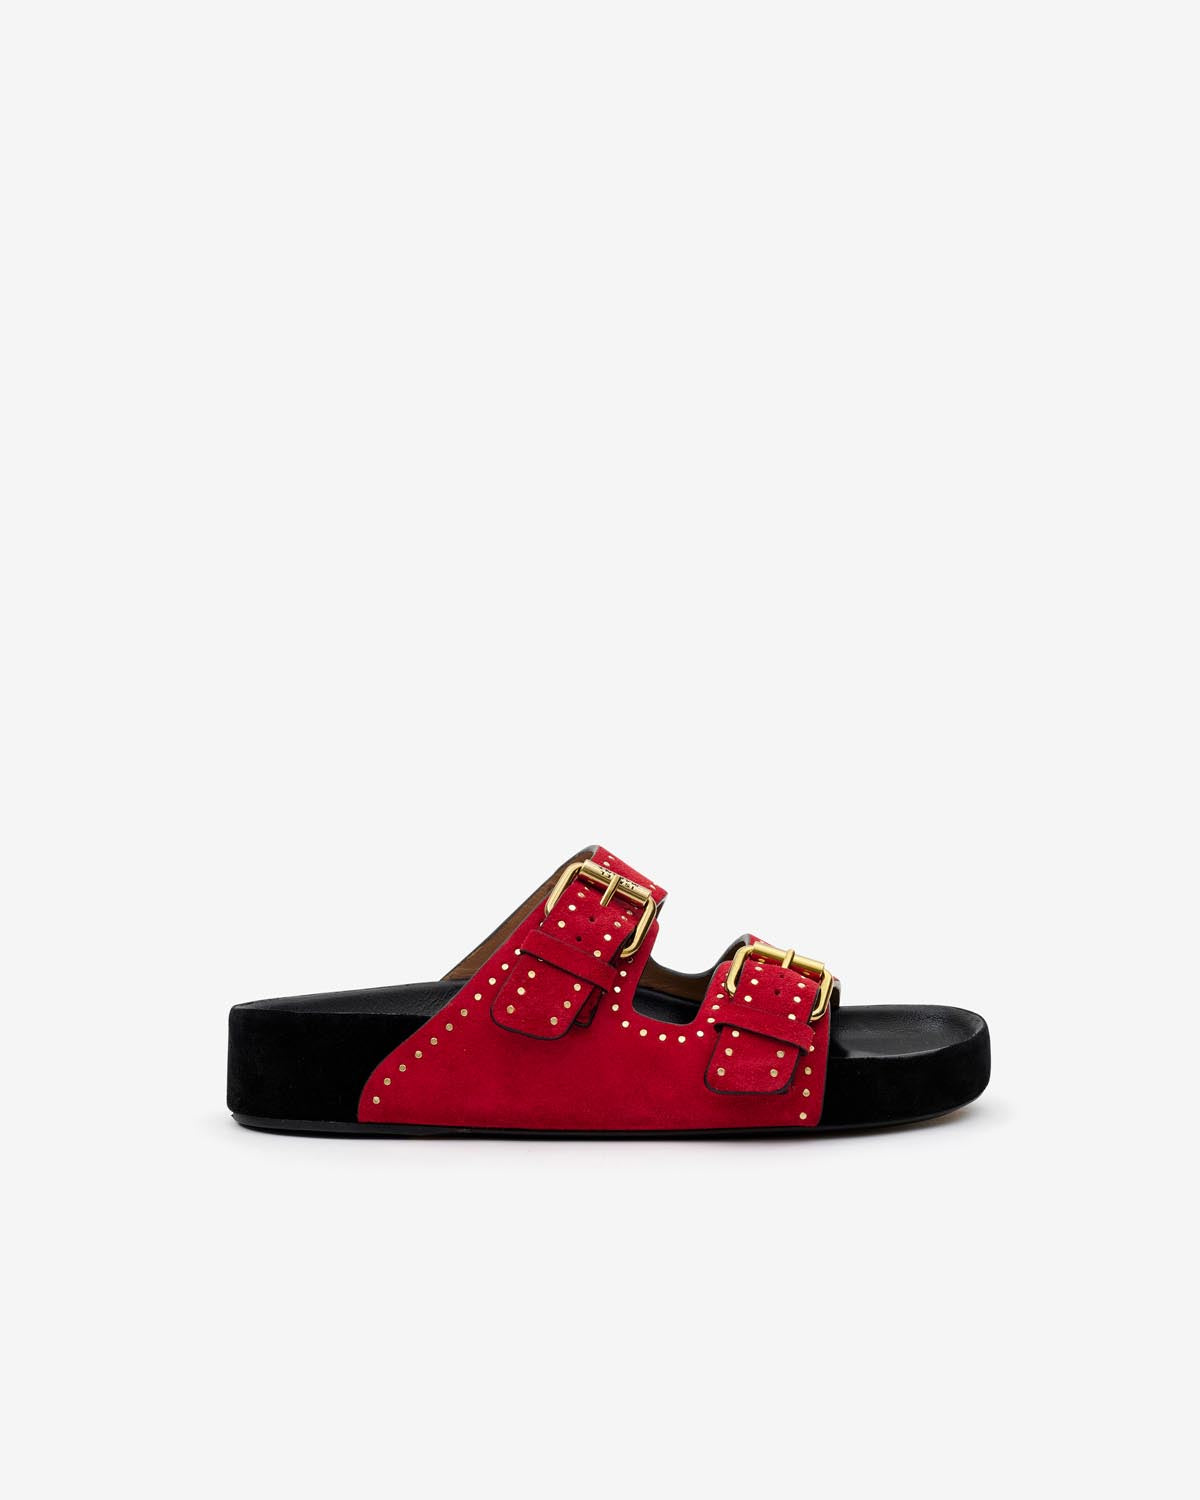 Lennyo sandals Woman Scarlet red 1